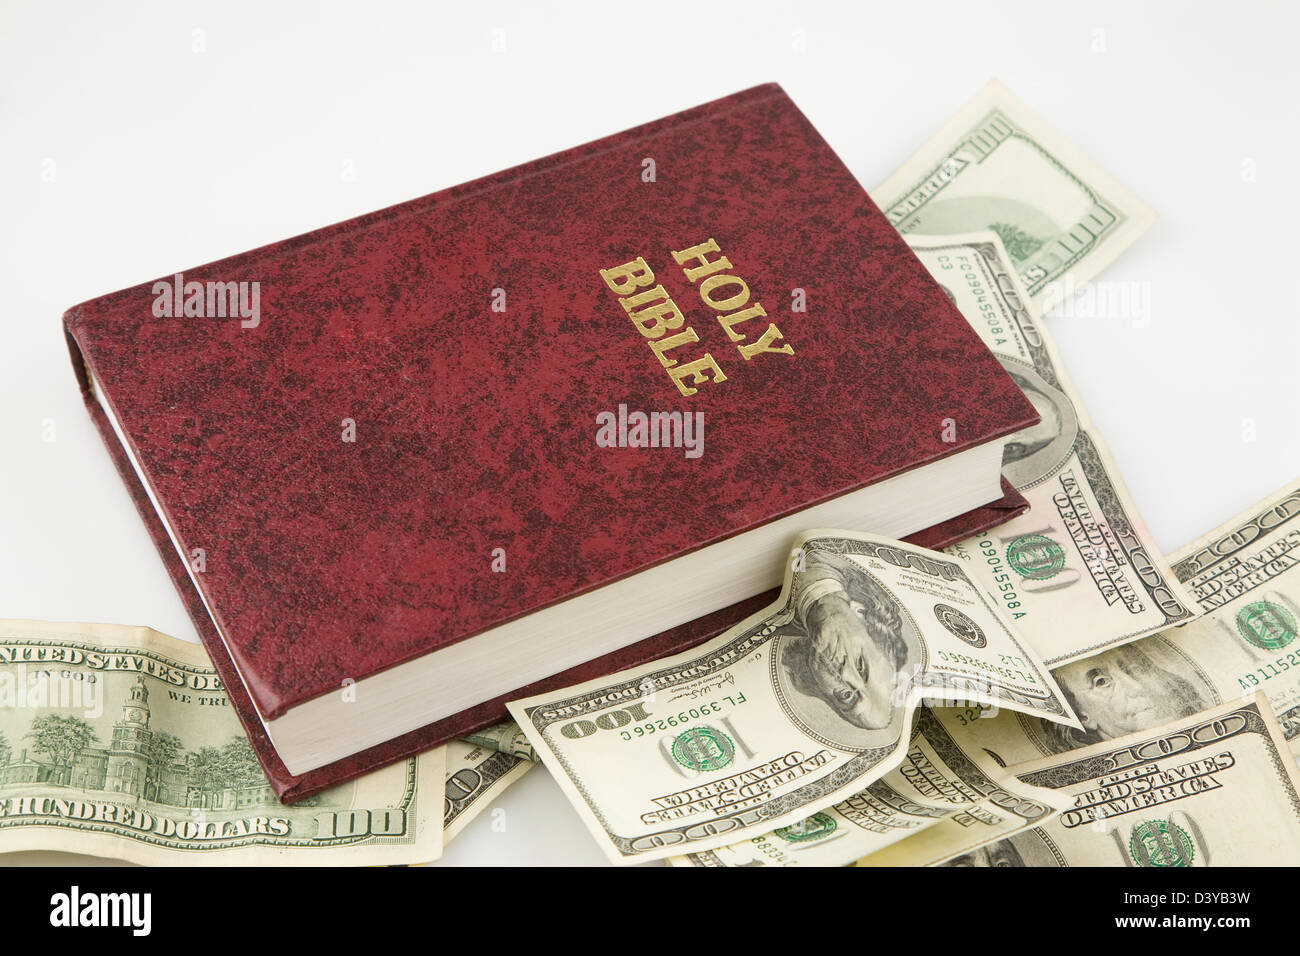 large stack or pile of hundred dollar bills in US currency Stock Photo